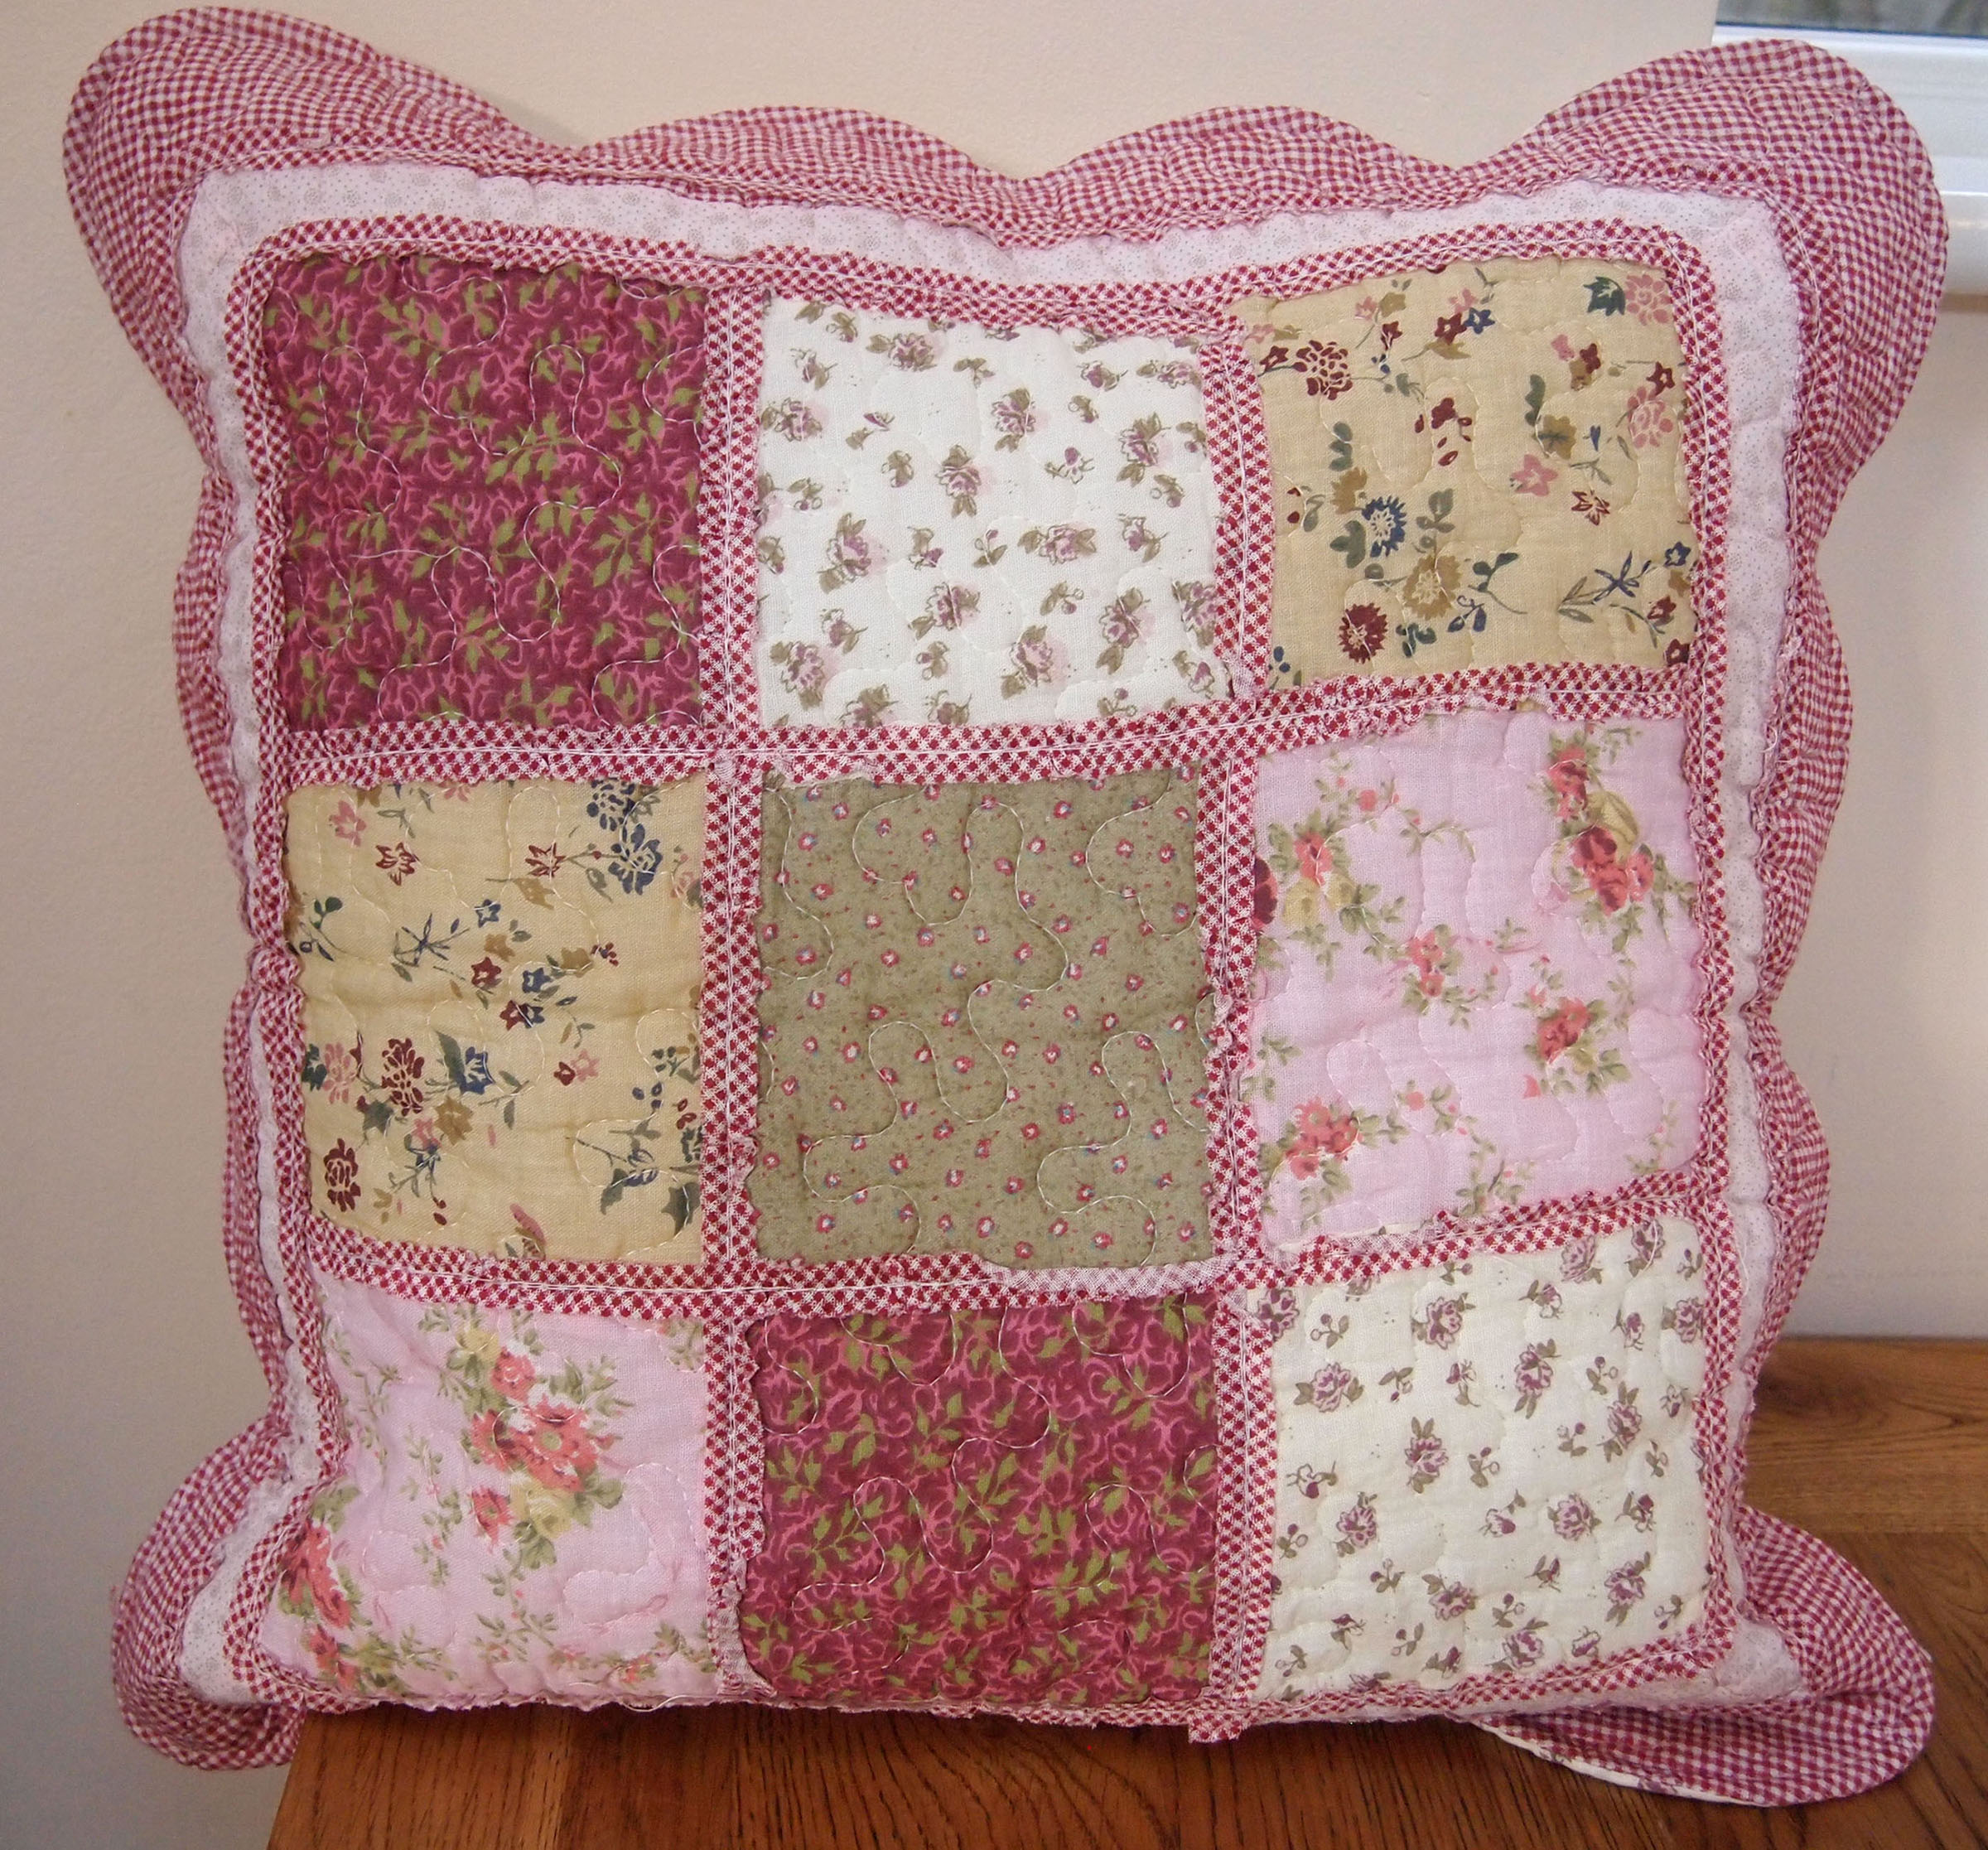 18" x 18" Red Floral Patchwork Cushion Cover